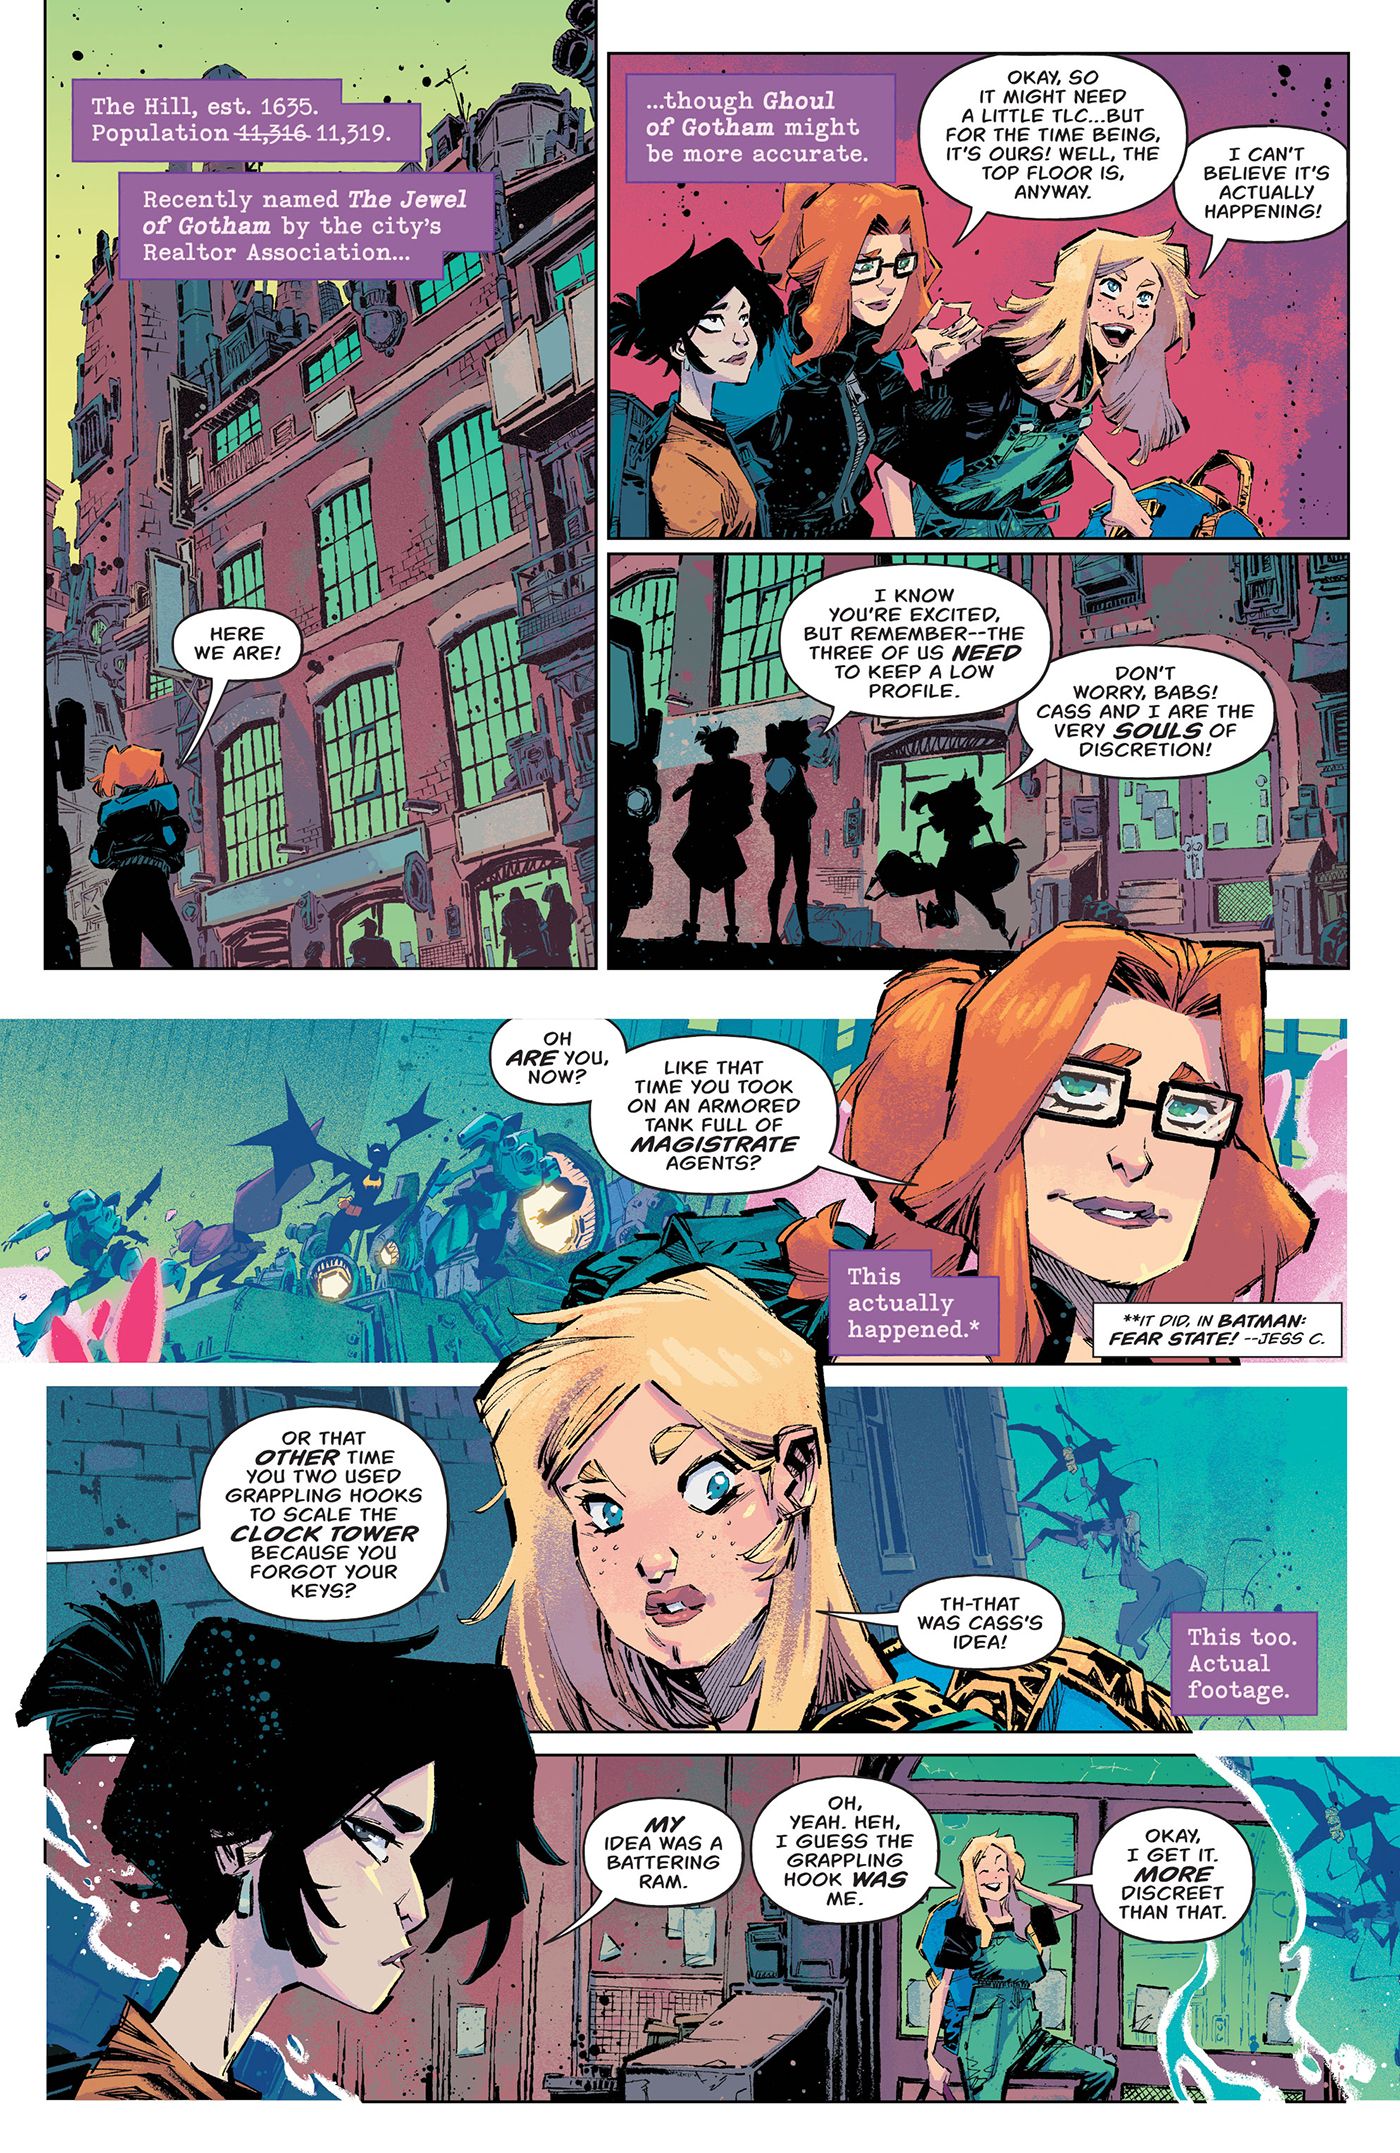 Barbara, Cass and Steph movie into Gotham's The Hill.